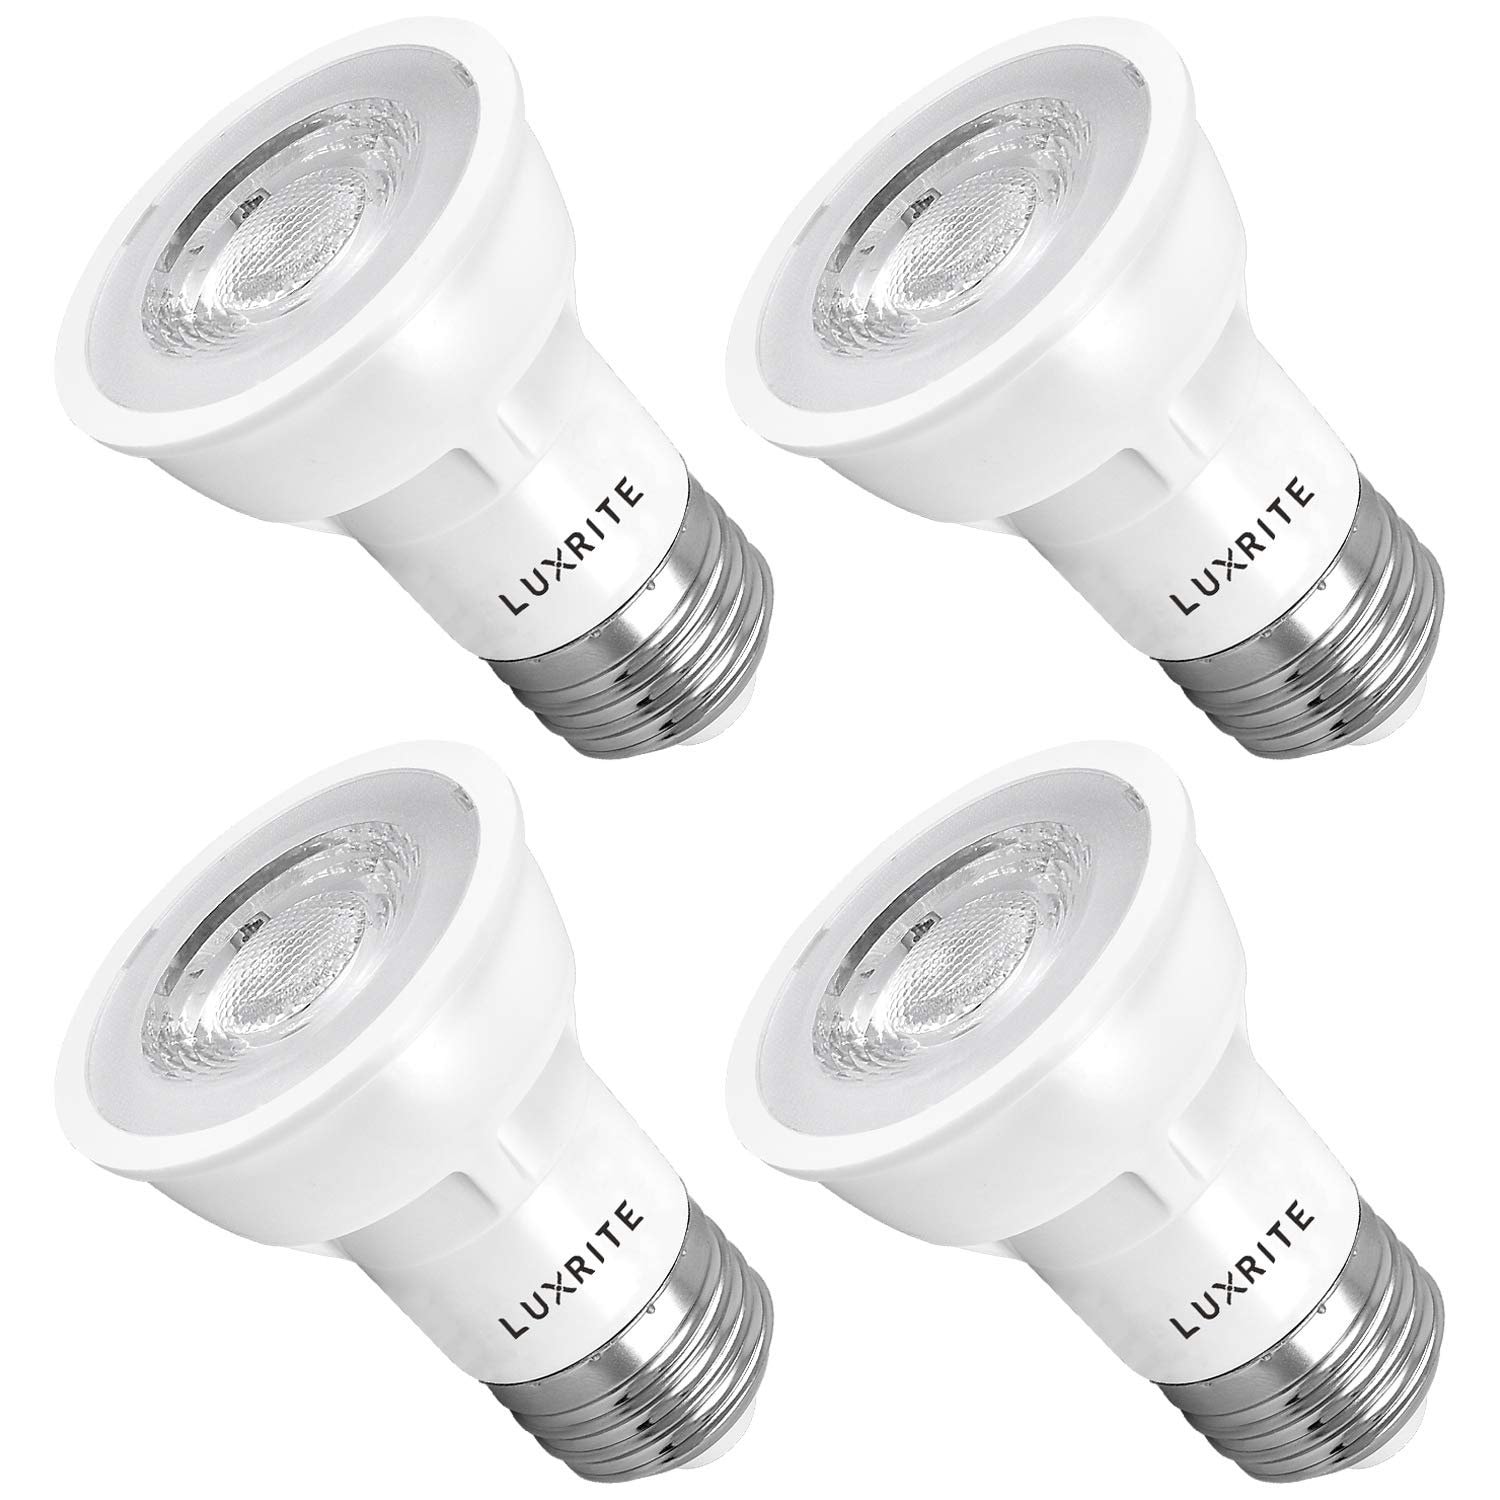 LUXRITE MR16 LED Bulb 50W Equivalent, 12V, 2700K Warm White Dimmable, 500  Lumens, GU5.3 LED Spotlight Bulb 6.5W, Enclosed Fixture Rated, Perfect for